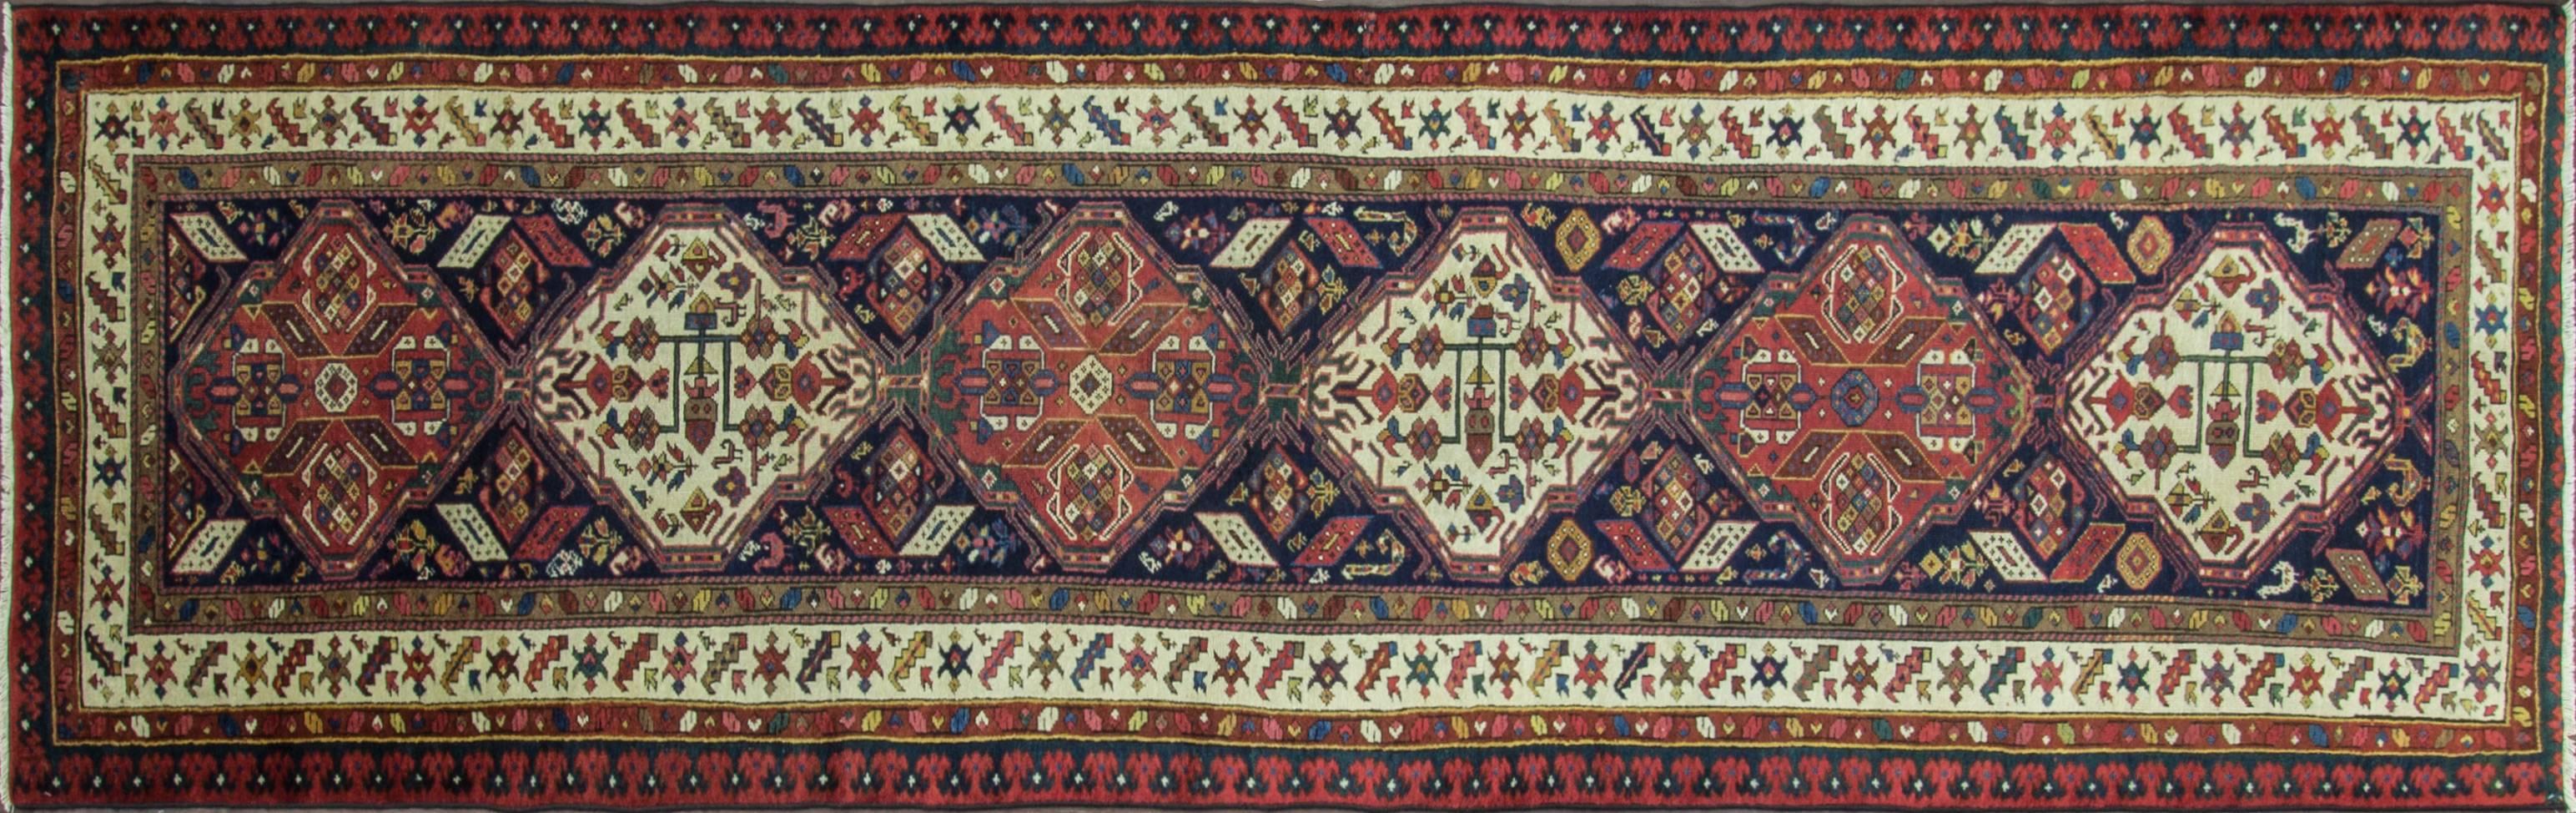 Bakshaish, Heriz Serapi.
Bakshaish rugs made in Persia, Bakshaish (Bakshaish or Bakhshaysh) rugs adapt the style and feeling of the finest smaller village or tribal rugs to the scale of room-size pieces. The drawing of Bakshaish rugs and carpets is